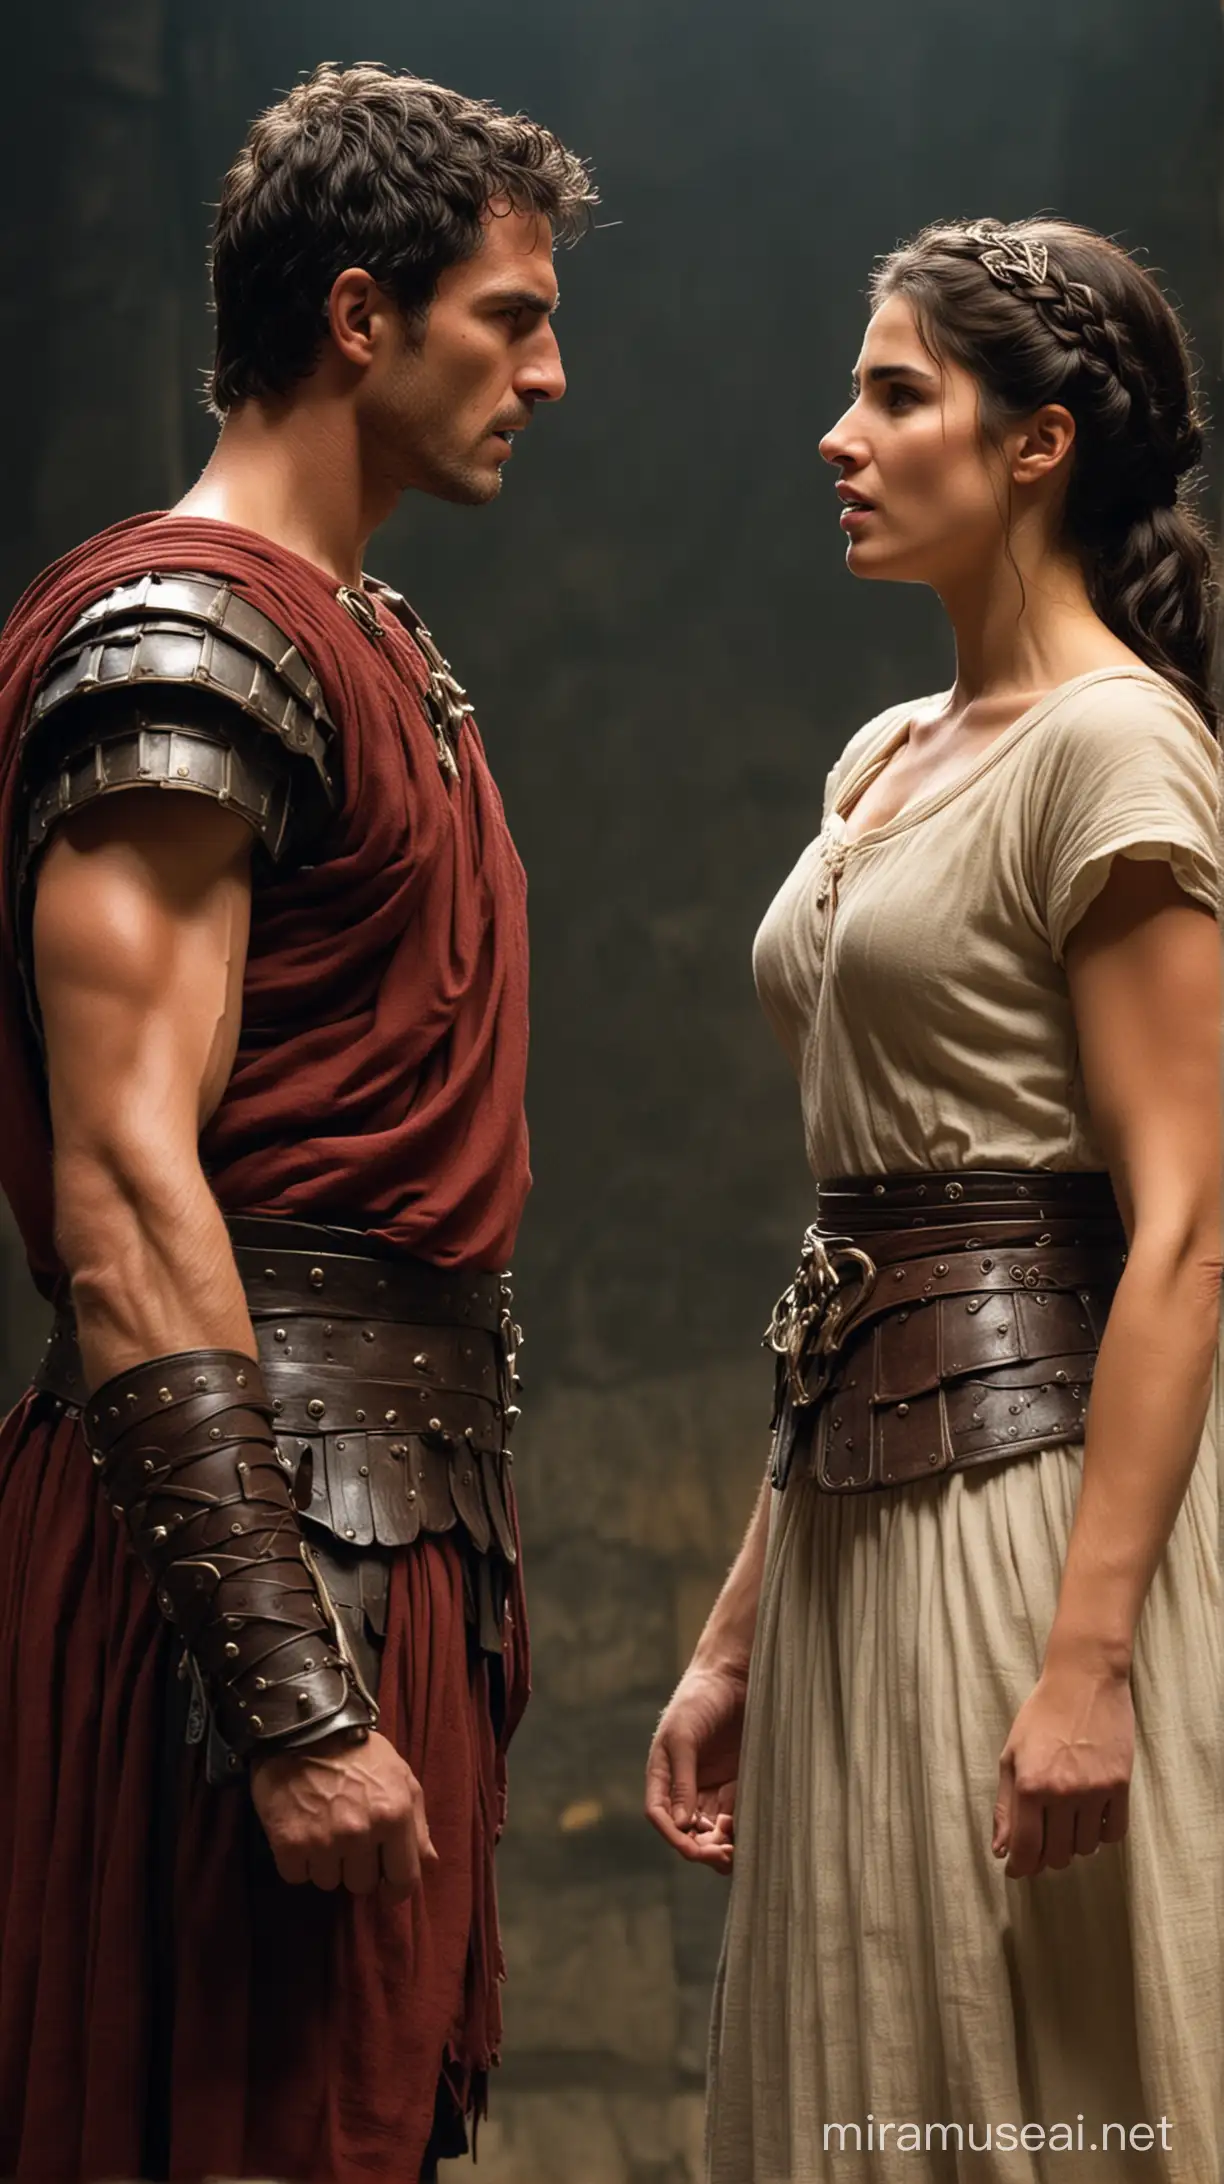 Octavia and Mark Antony Engage in Intense Confrontation Amid Moody Atmosphere